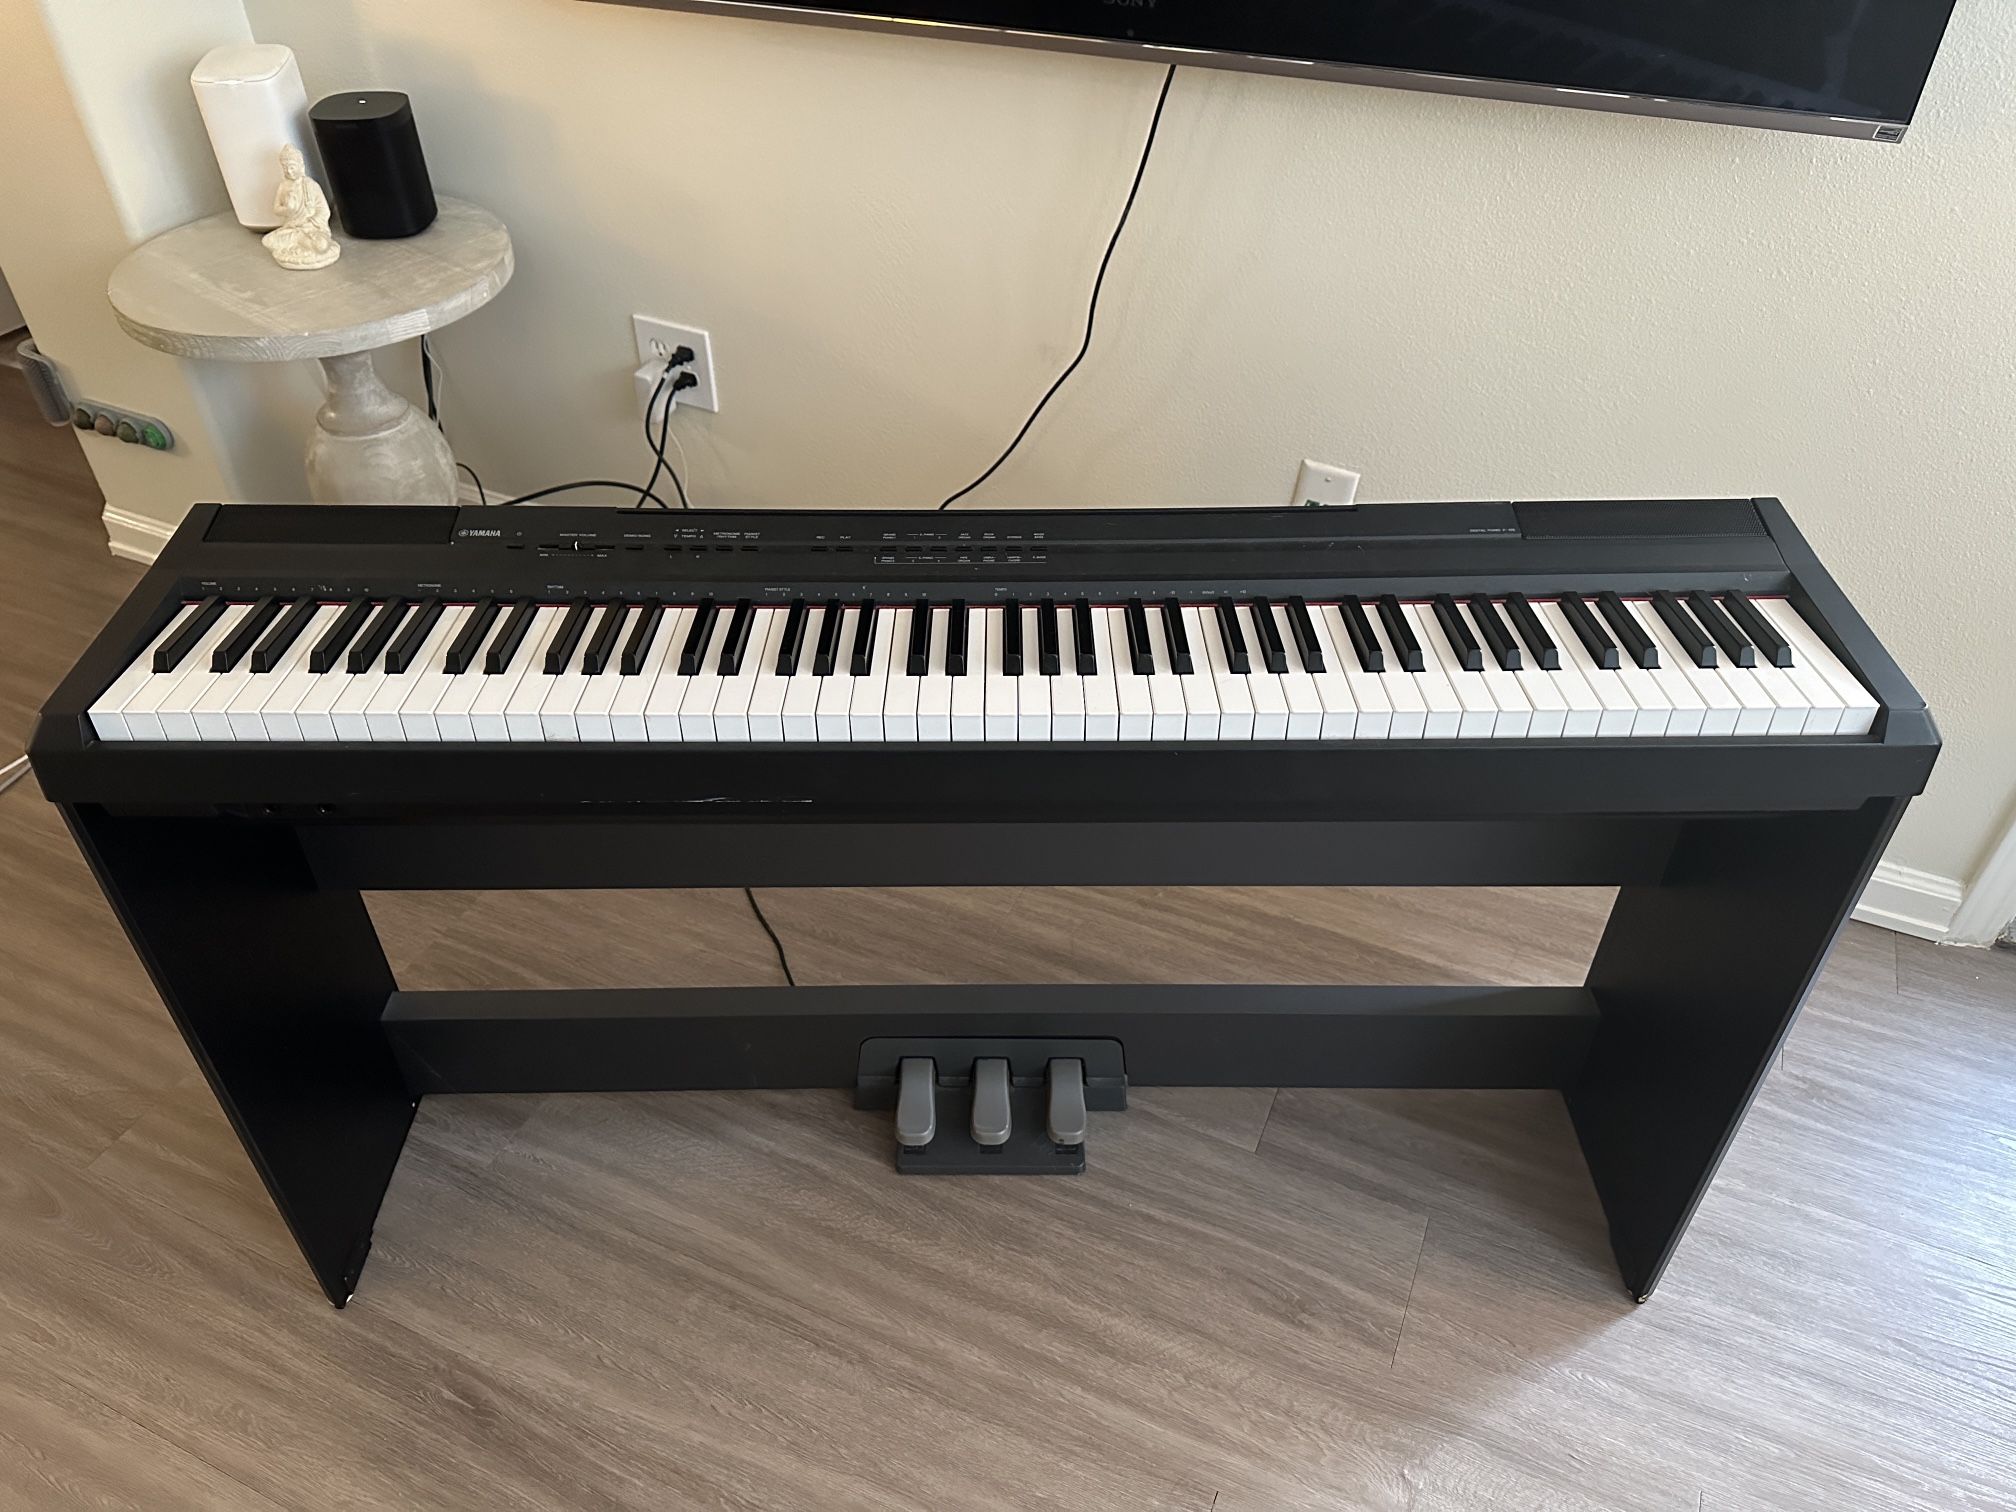 Yamaha P-105 Digital Piano (w/ pedals and stand)